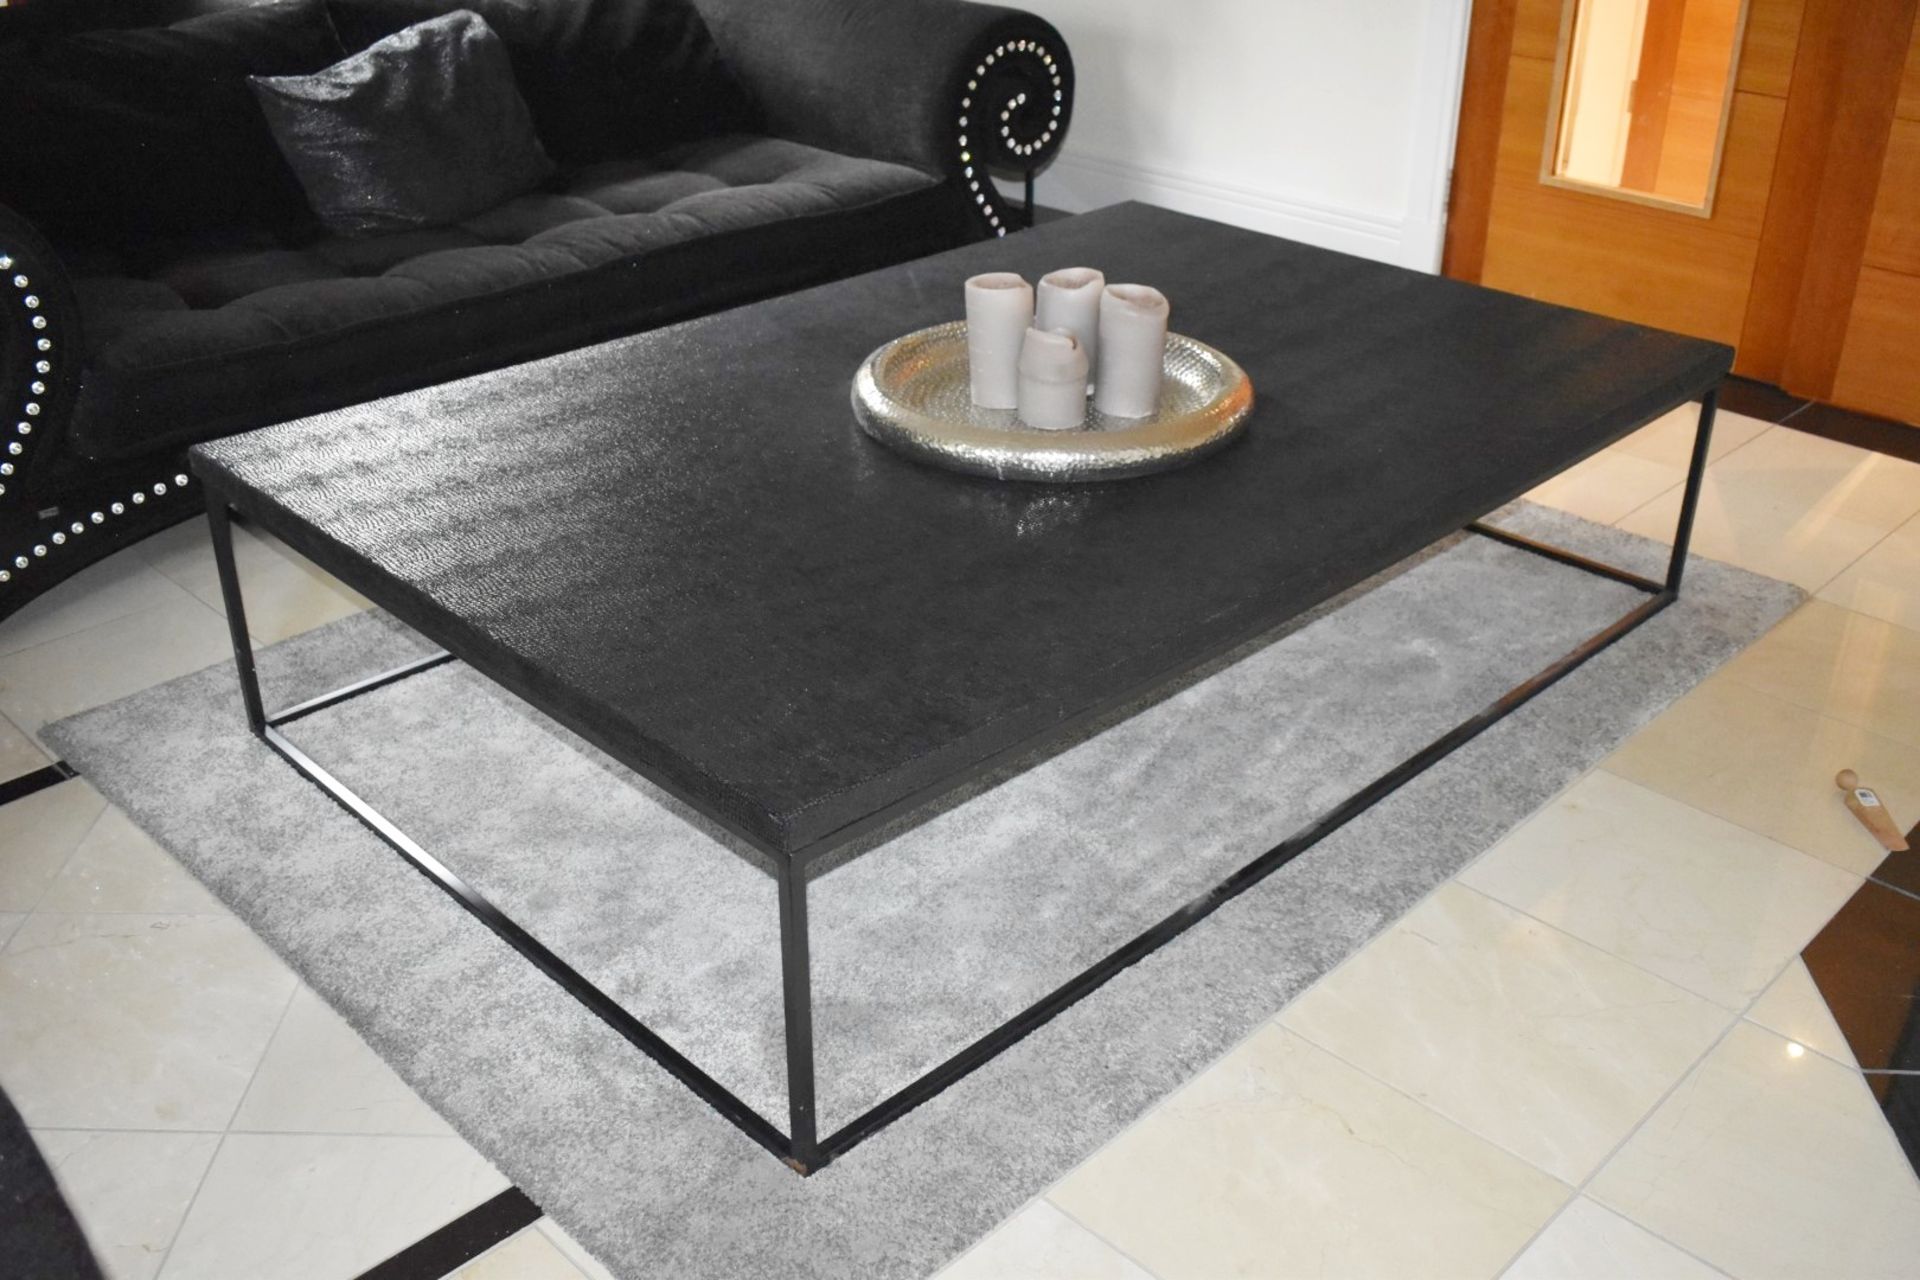 1 x Designer Guadarte Coffee Table With Faux Crocodile Skin Leather Finish - Large Size H45 x W200 x